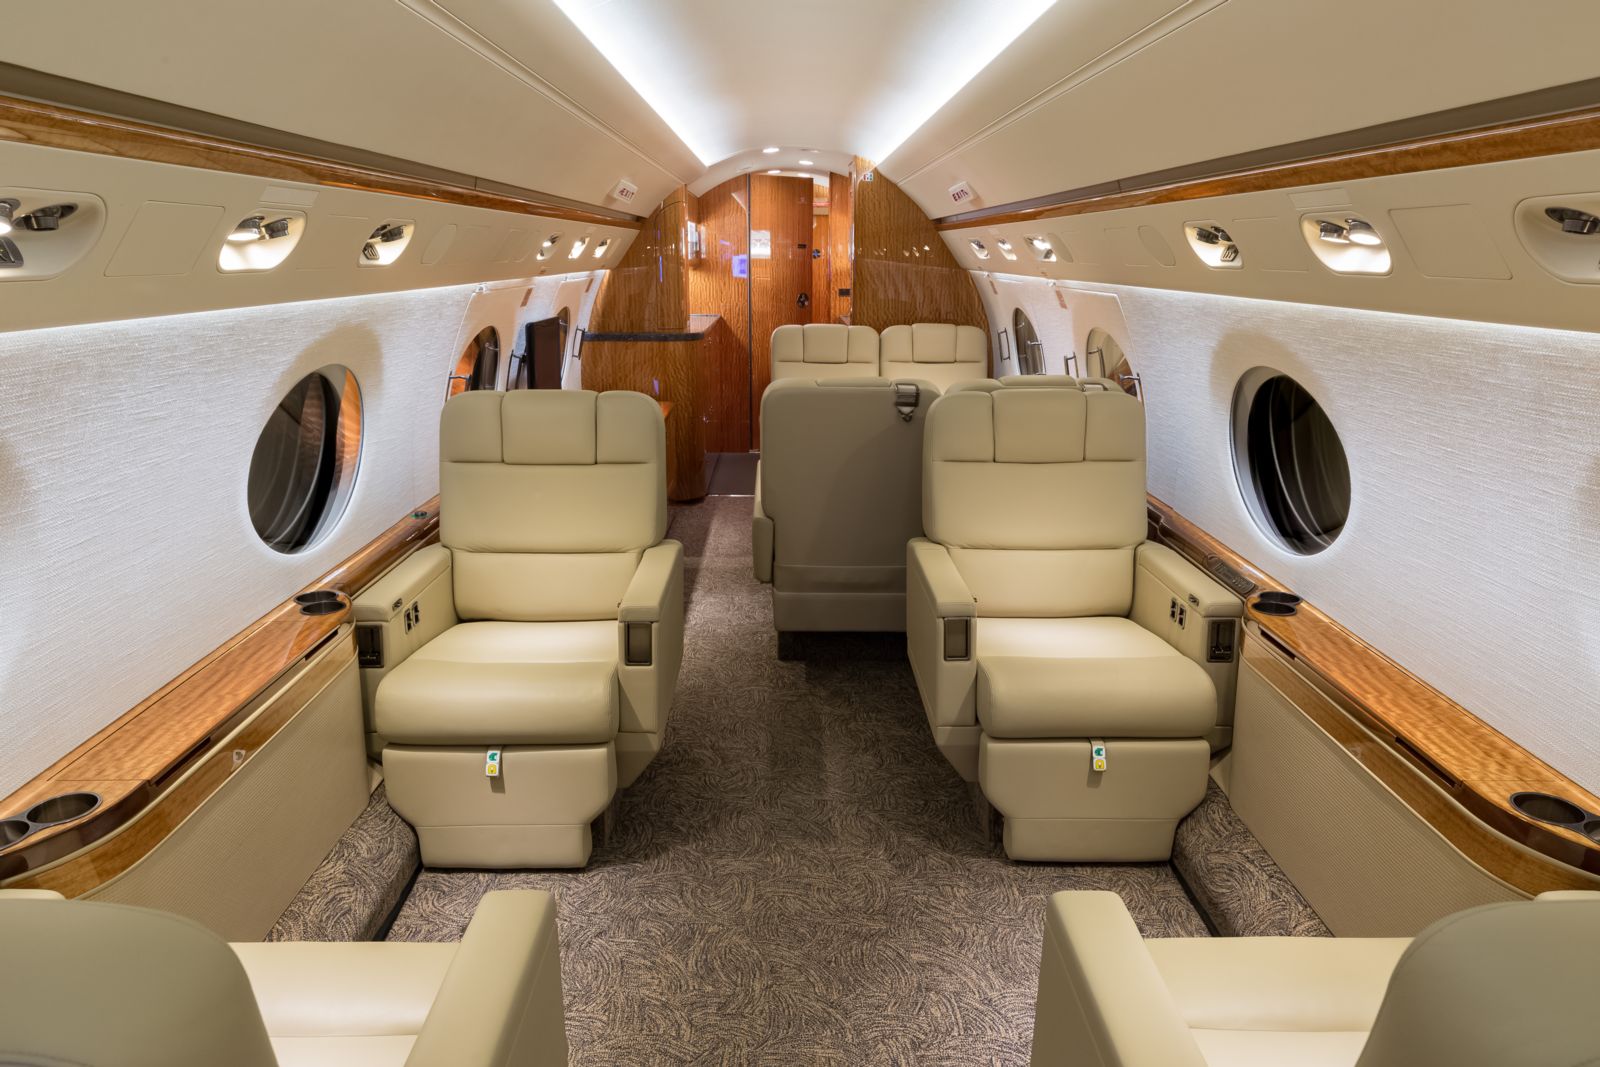 Gulfstream G550  S/N 5390 for sale | gallery image: /userfiles/images/aircraft-listing/Gulfstream_G550_sn5390/bfp_8042.jpg